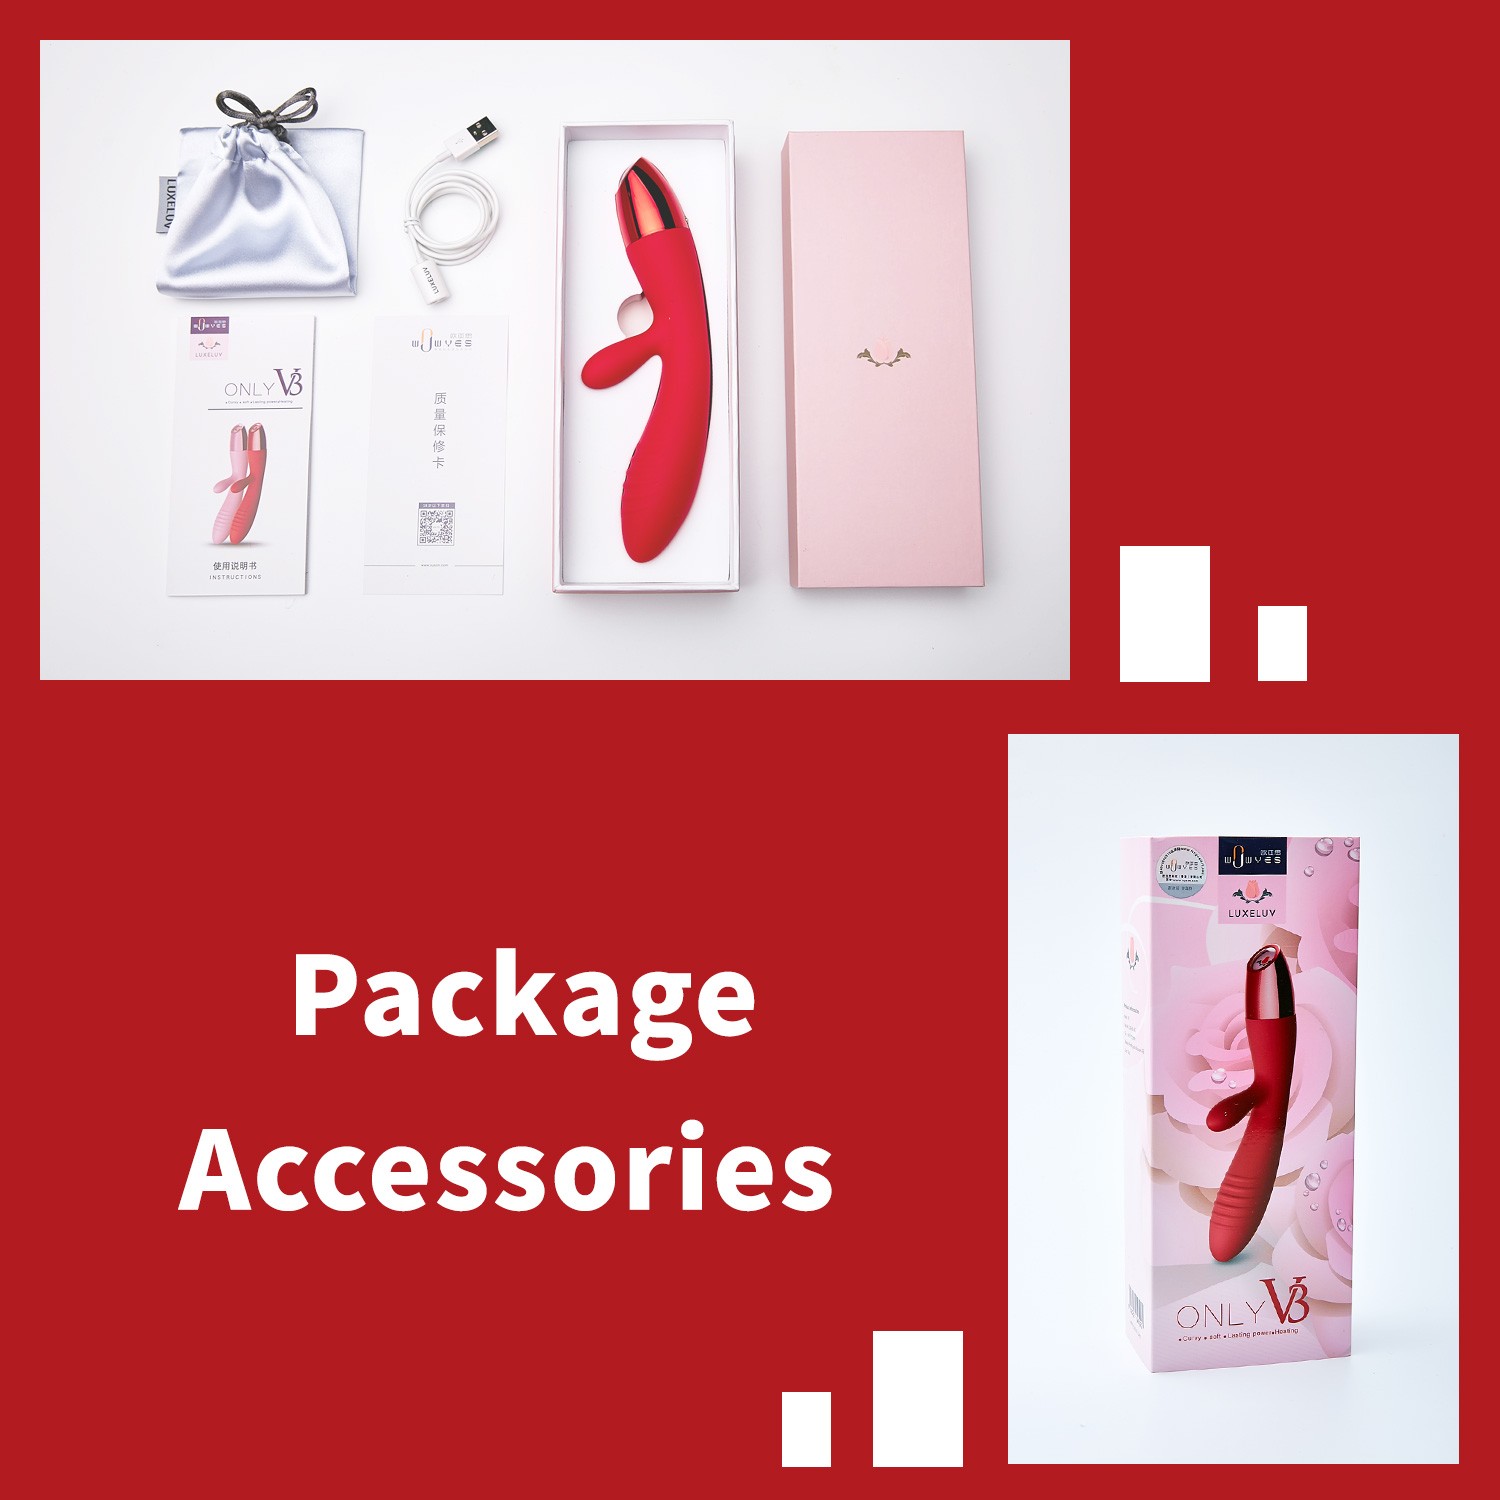 Luxeluv V3 Vibrator Massager Package Accessories